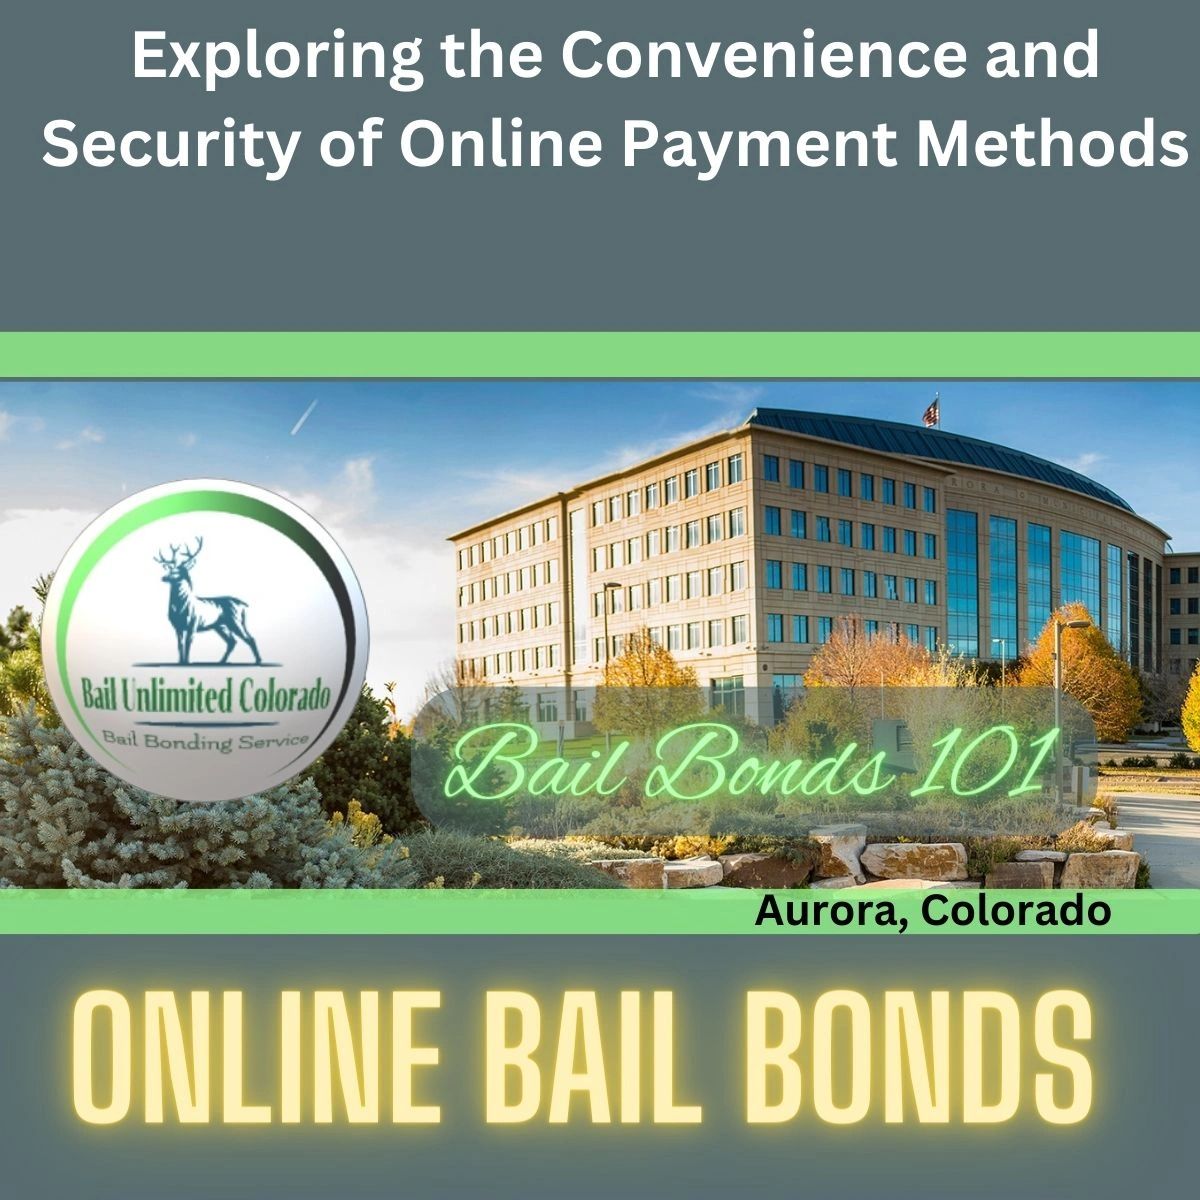 Bail Bonds 101: Exploring the Convenience and Security of Online Payment Methods for Bail Bonds in Colorado by Bail Unlimited Colorado Author Paul Trujillo